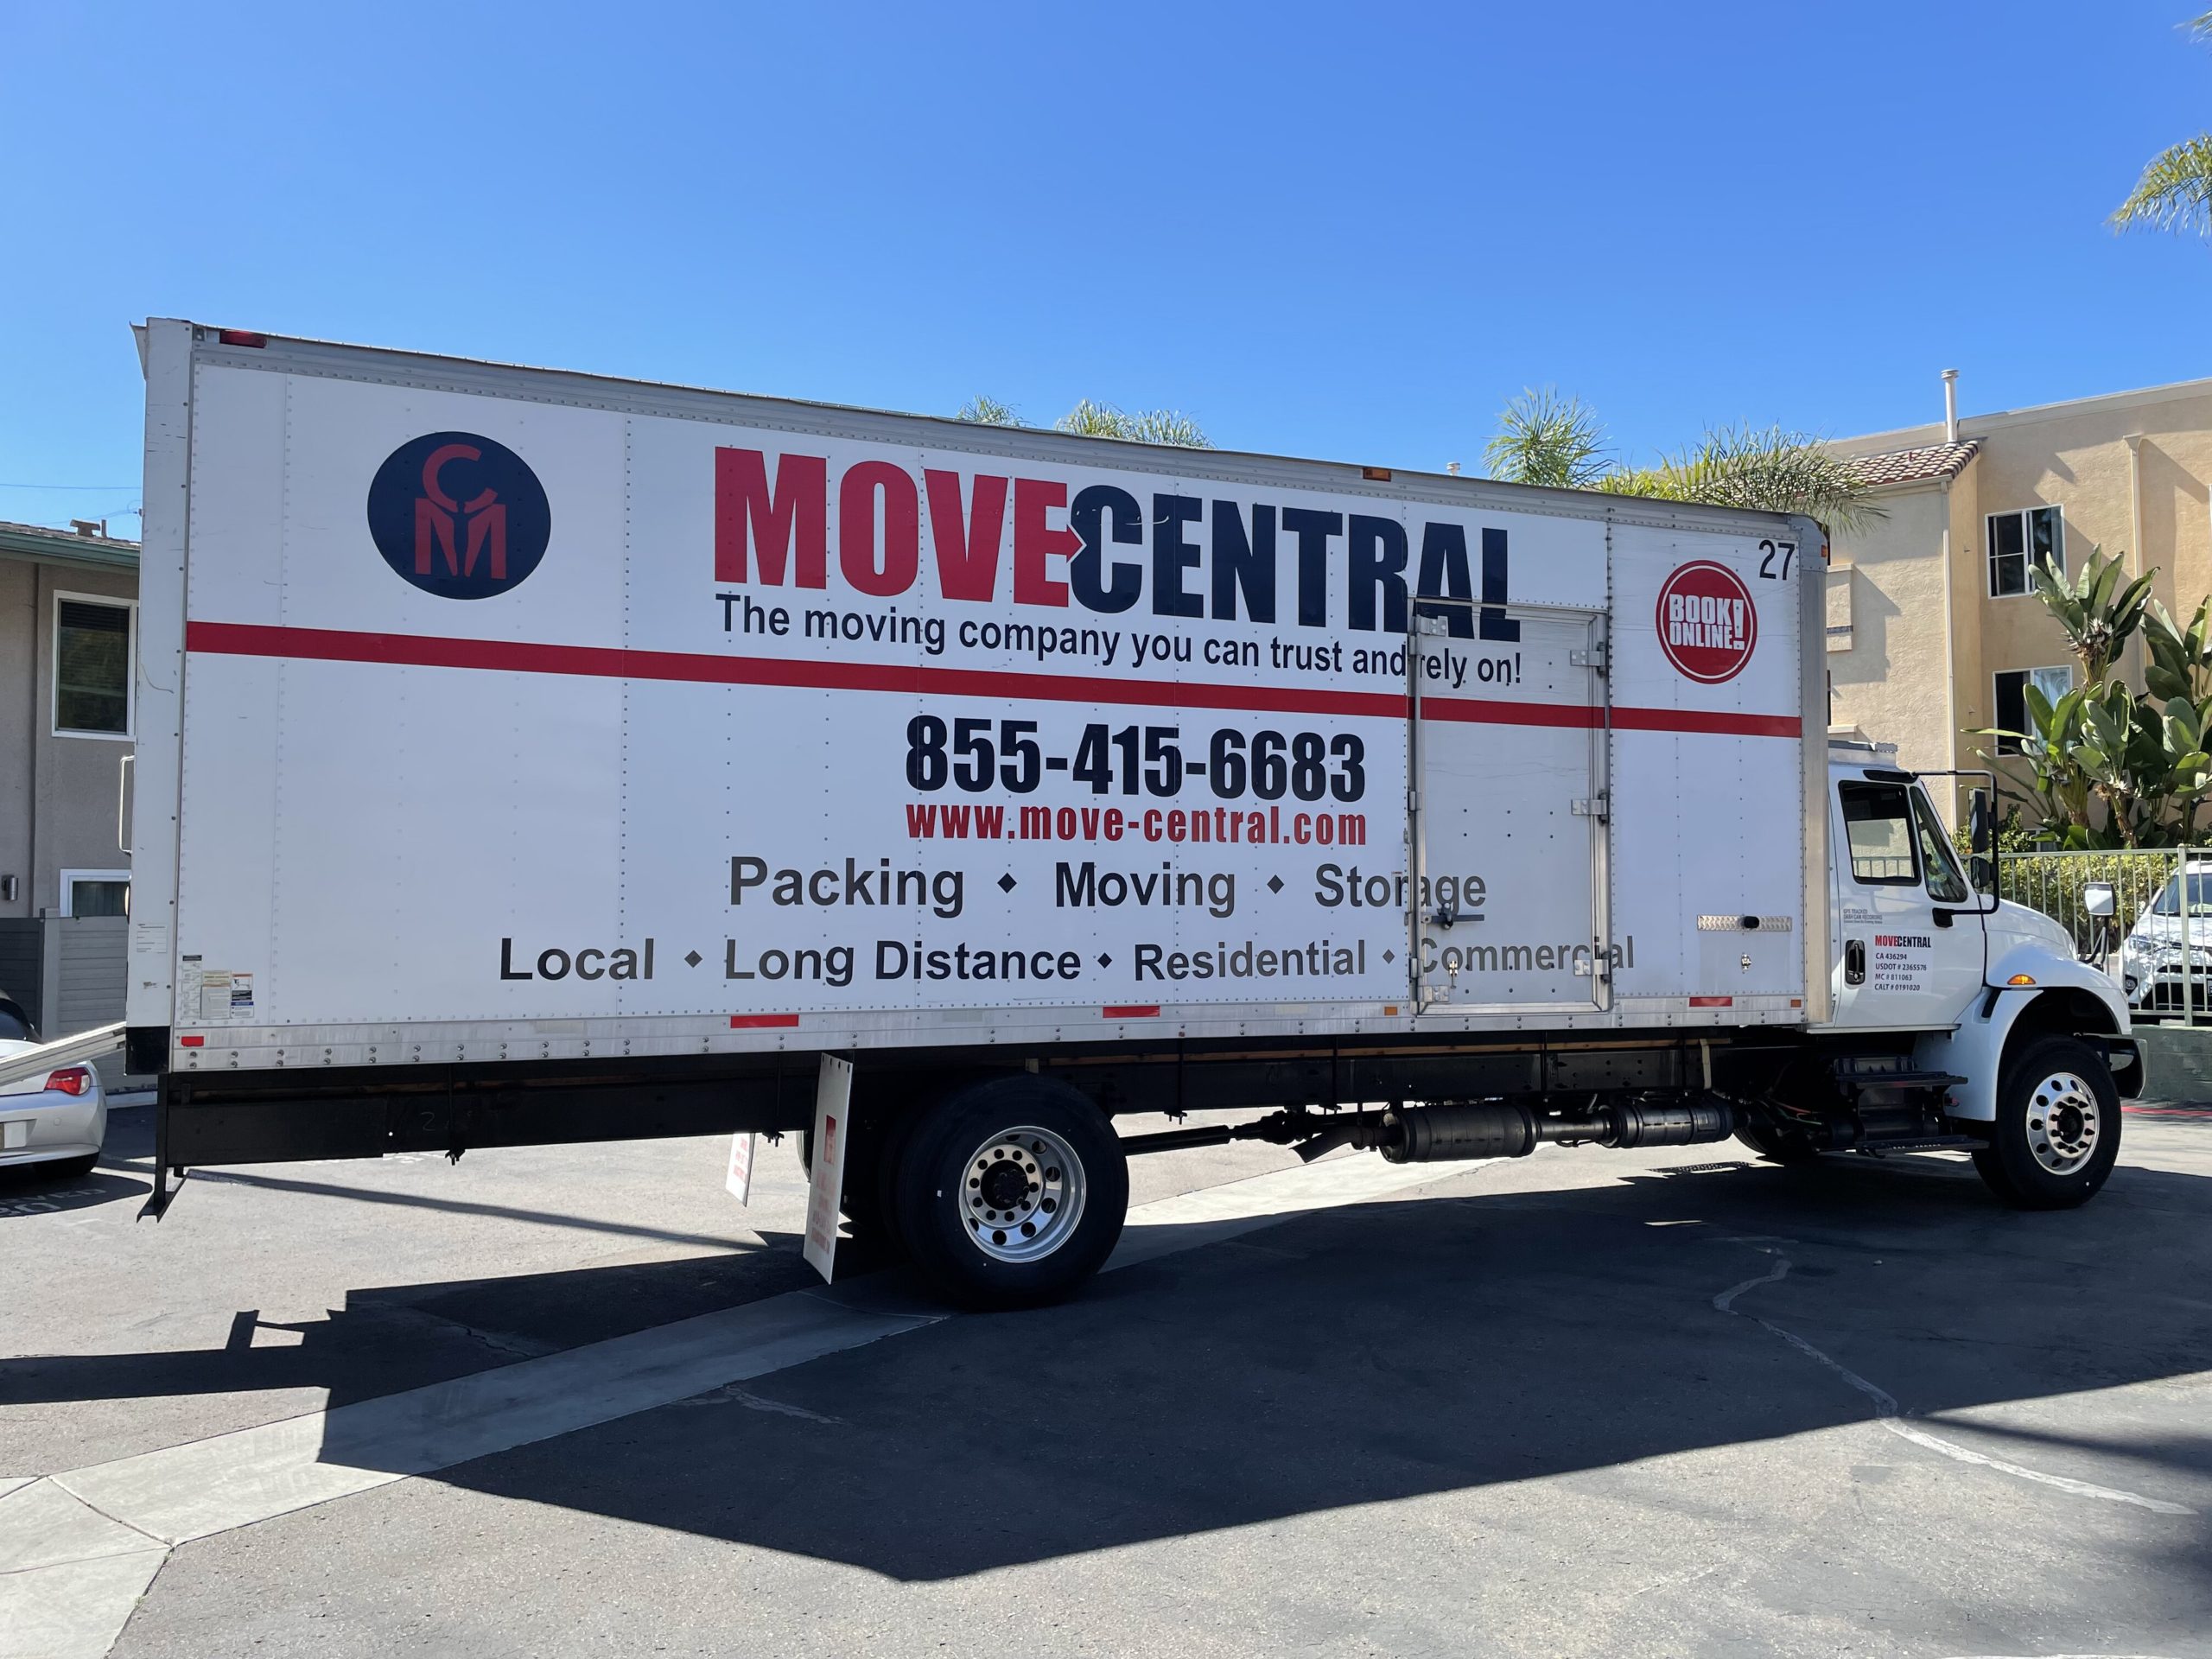 move-central-moving-truck-scaled